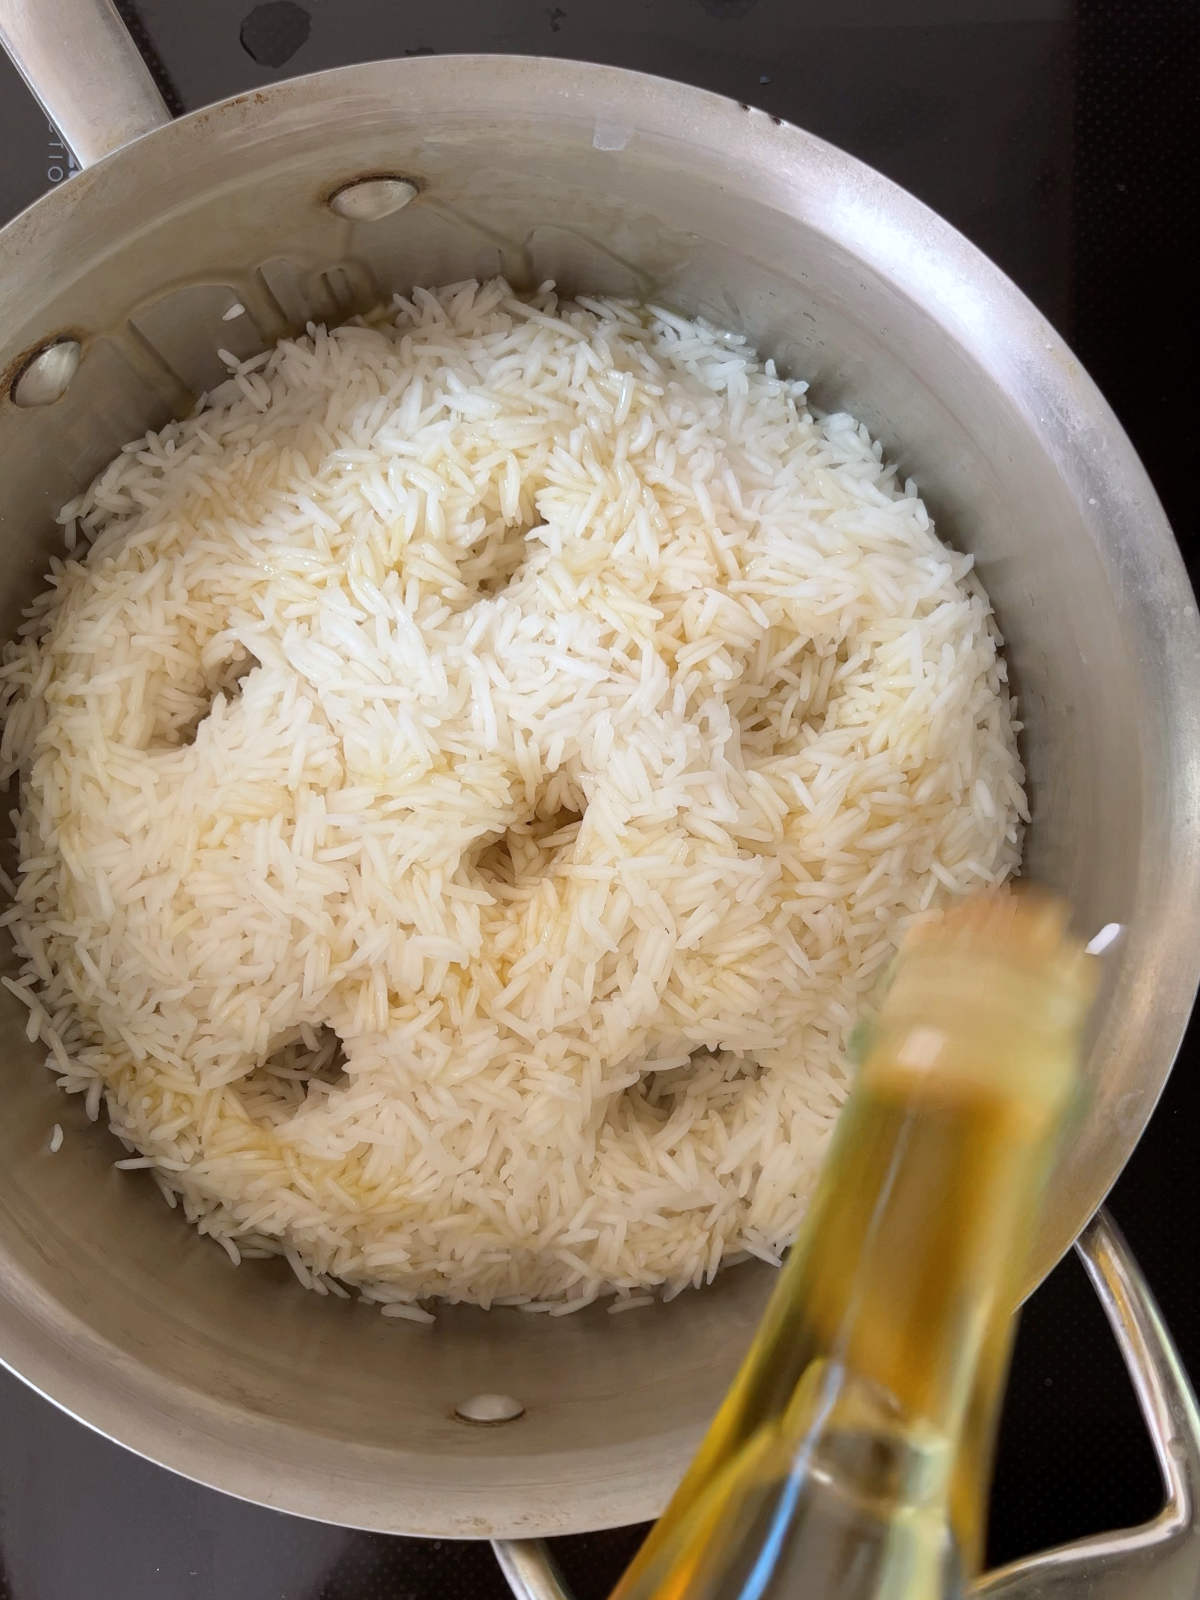 Pouring oil into a metal pot of rice with holes in the rice.